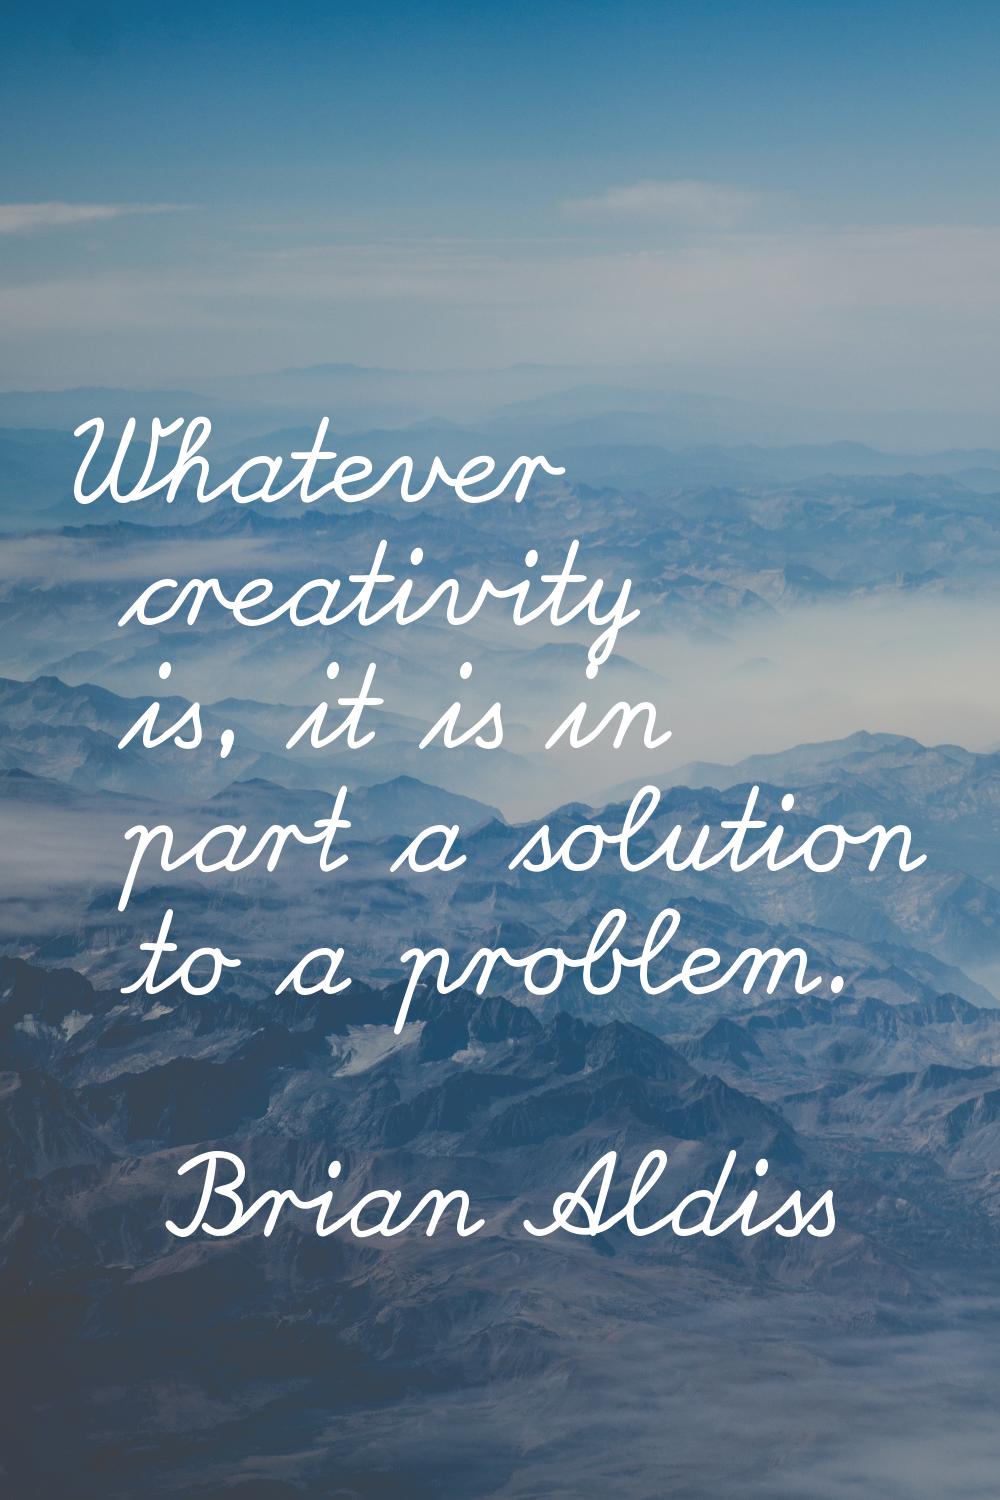 Whatever creativity is, it is in part a solution to a problem.